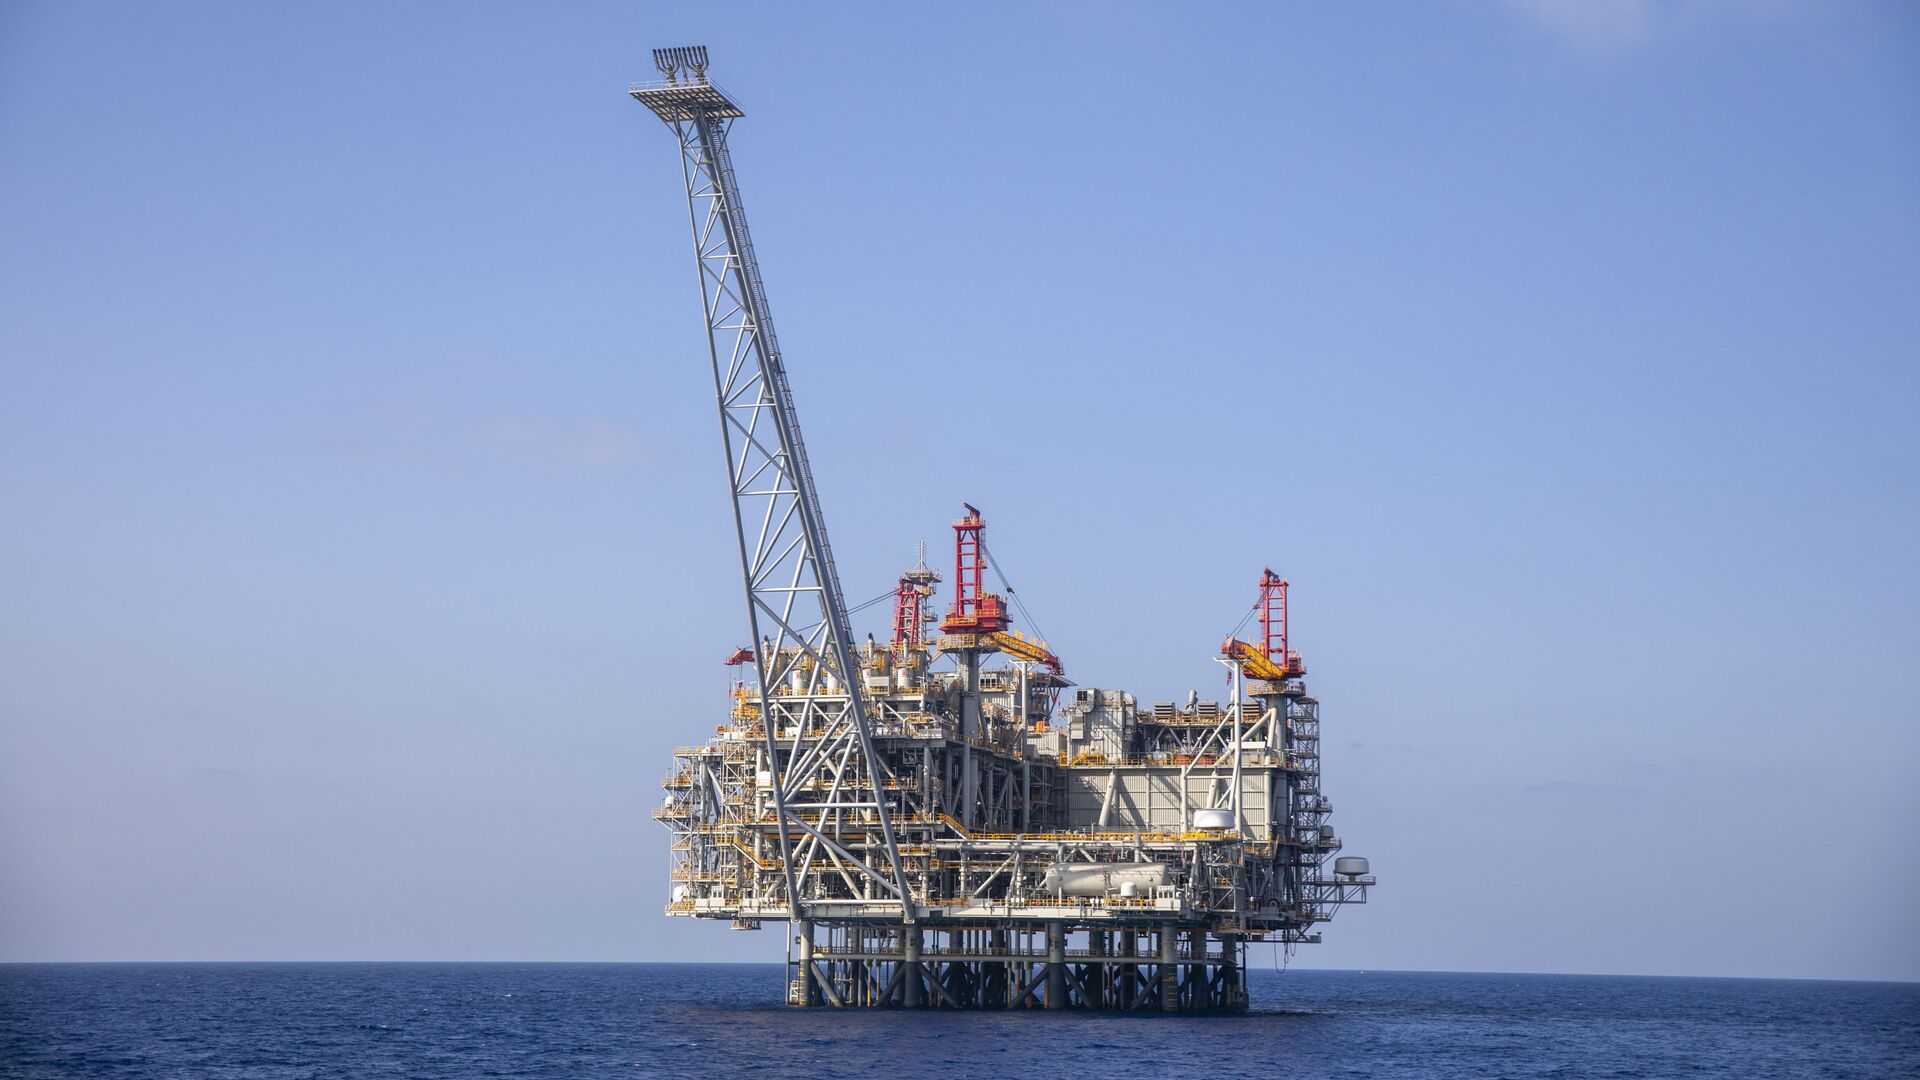 Israel's offshore Leviathan gas field in the Mediterranean Sea, Tuesday, Sept. 29, 2020. - Sputnik International, 1920, 22.01.2022